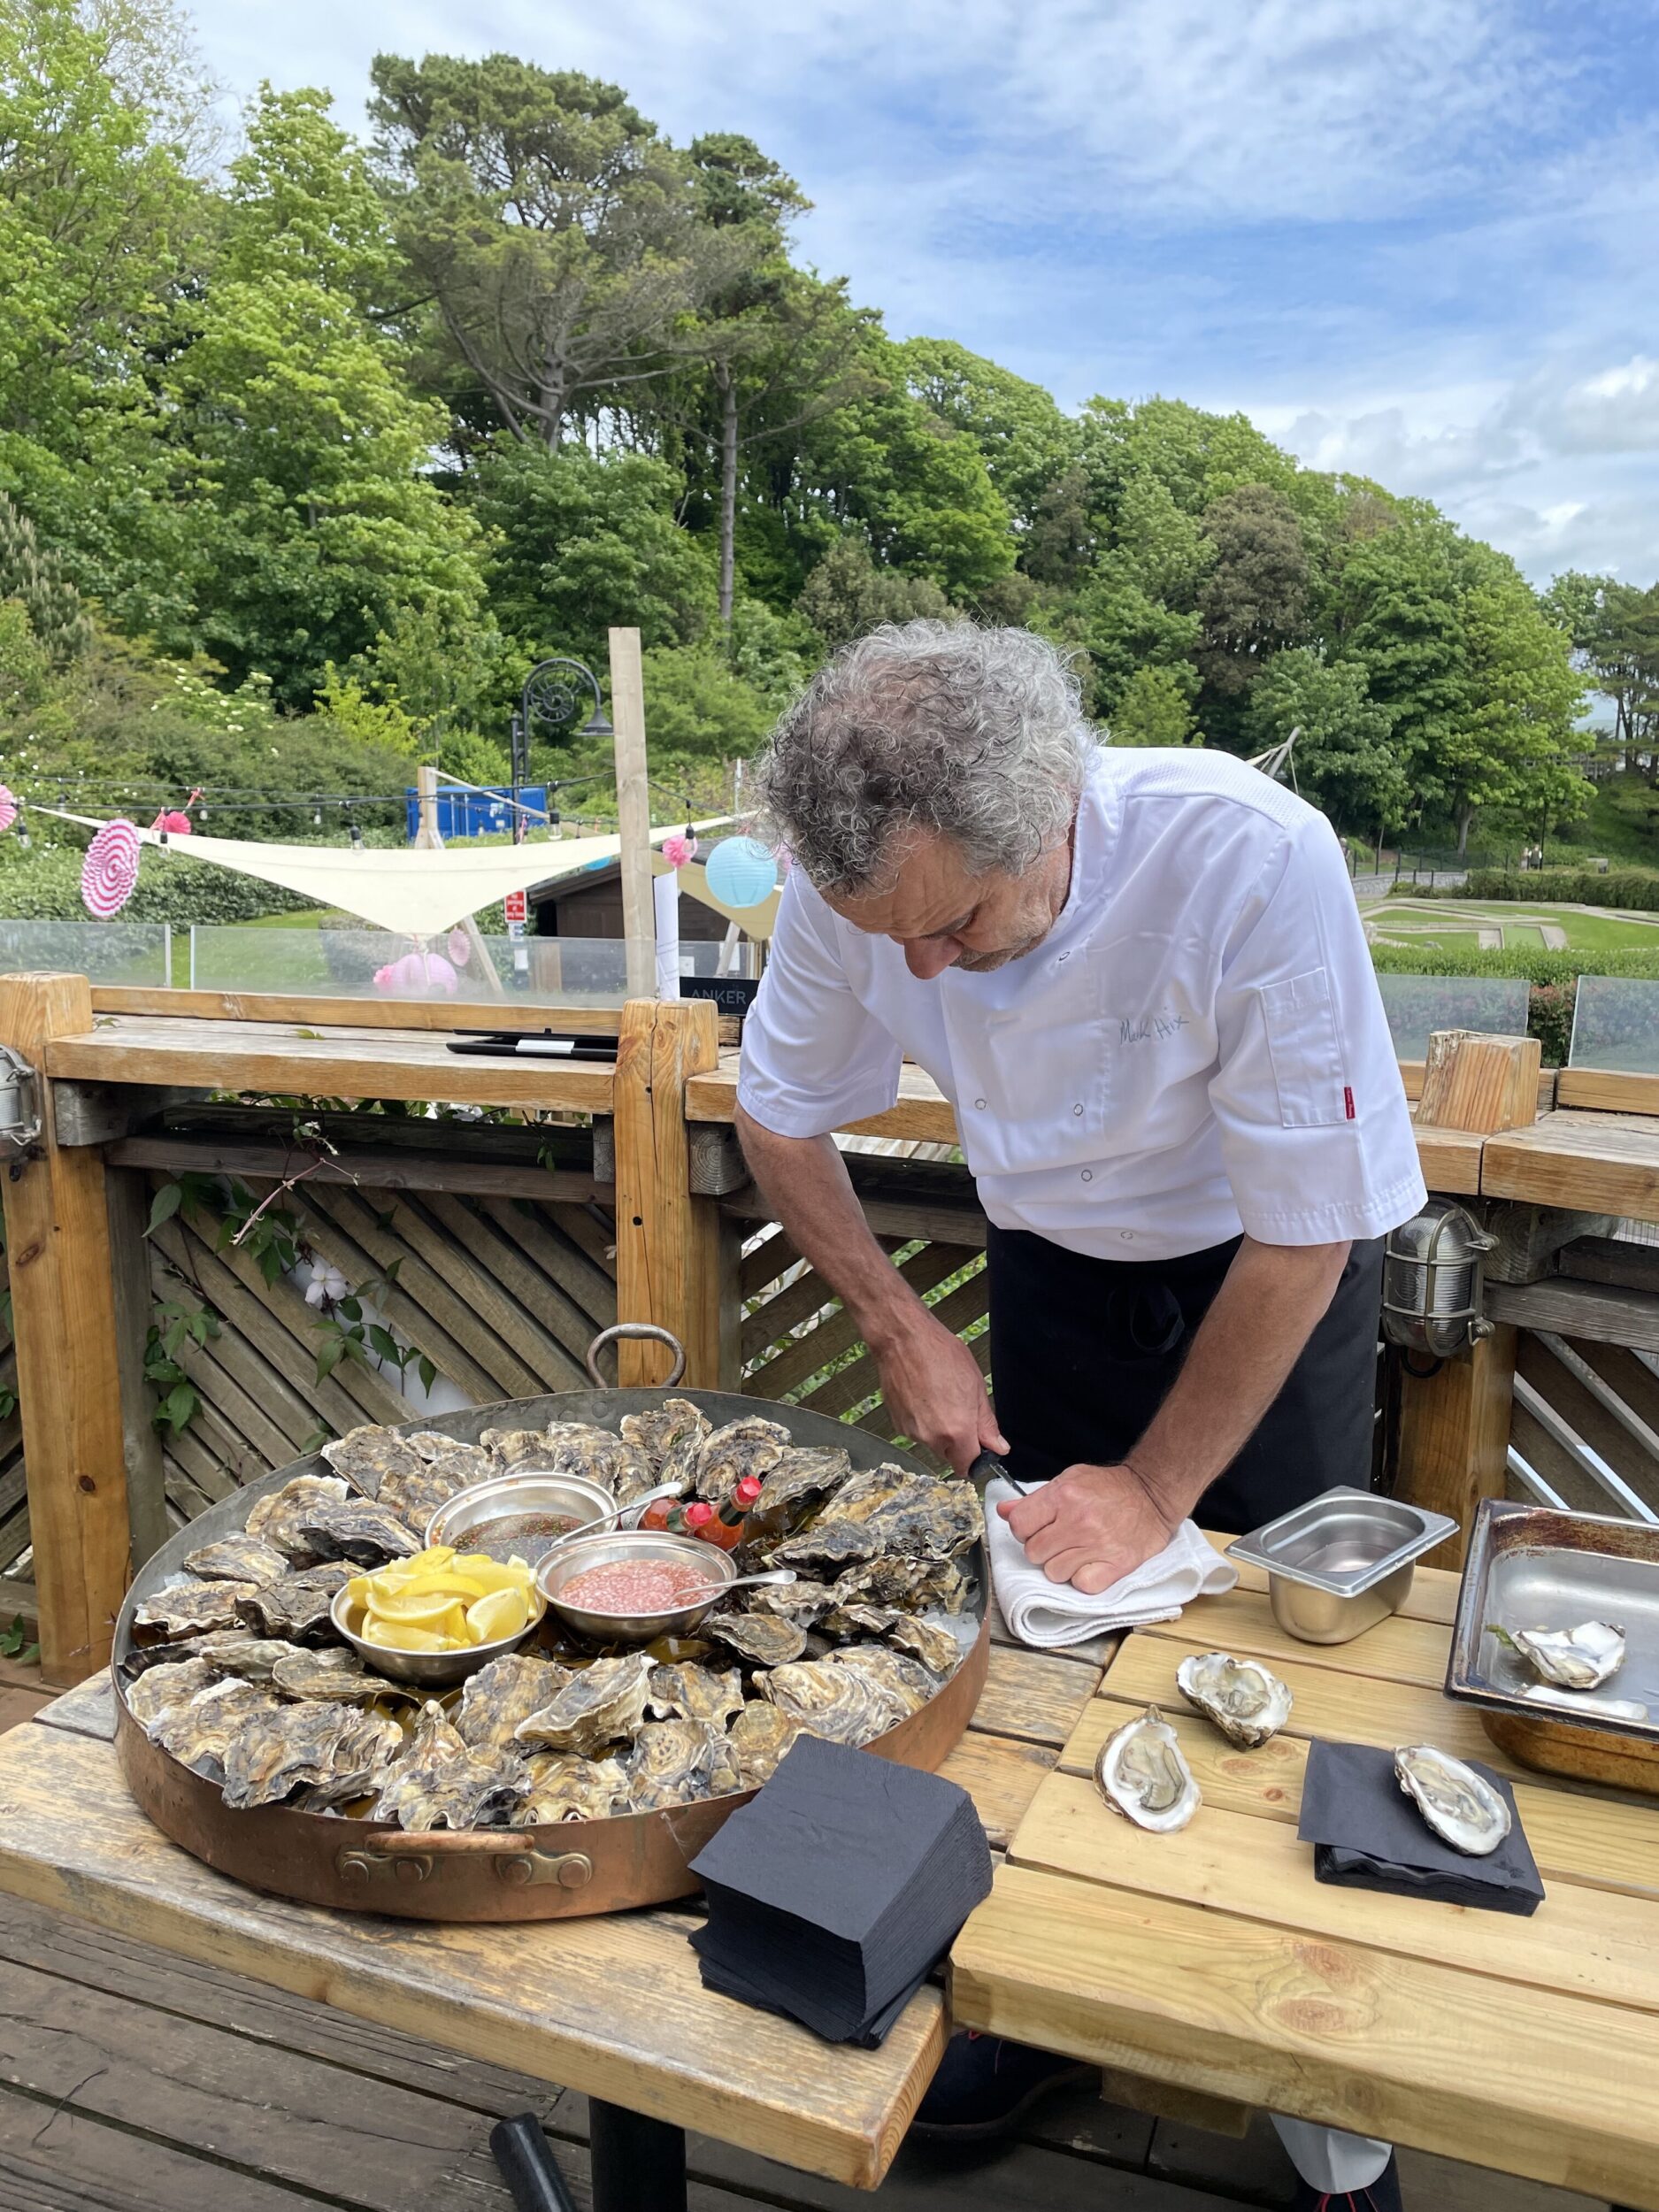 mark shucking oysters